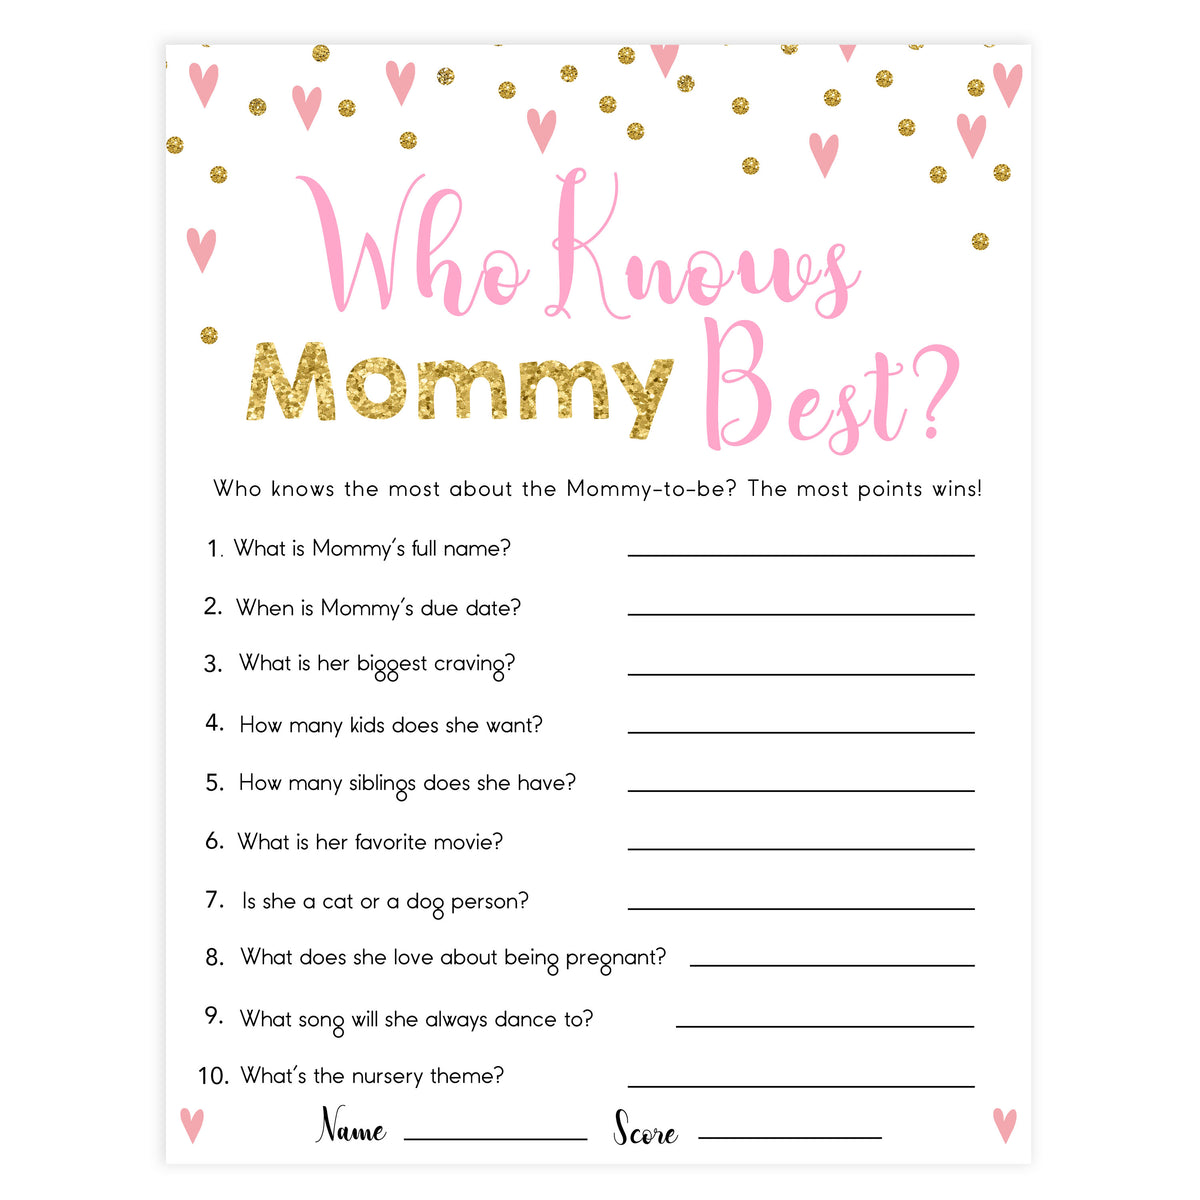 printable-who-knows-mommy-best-questions-printable-word-searches